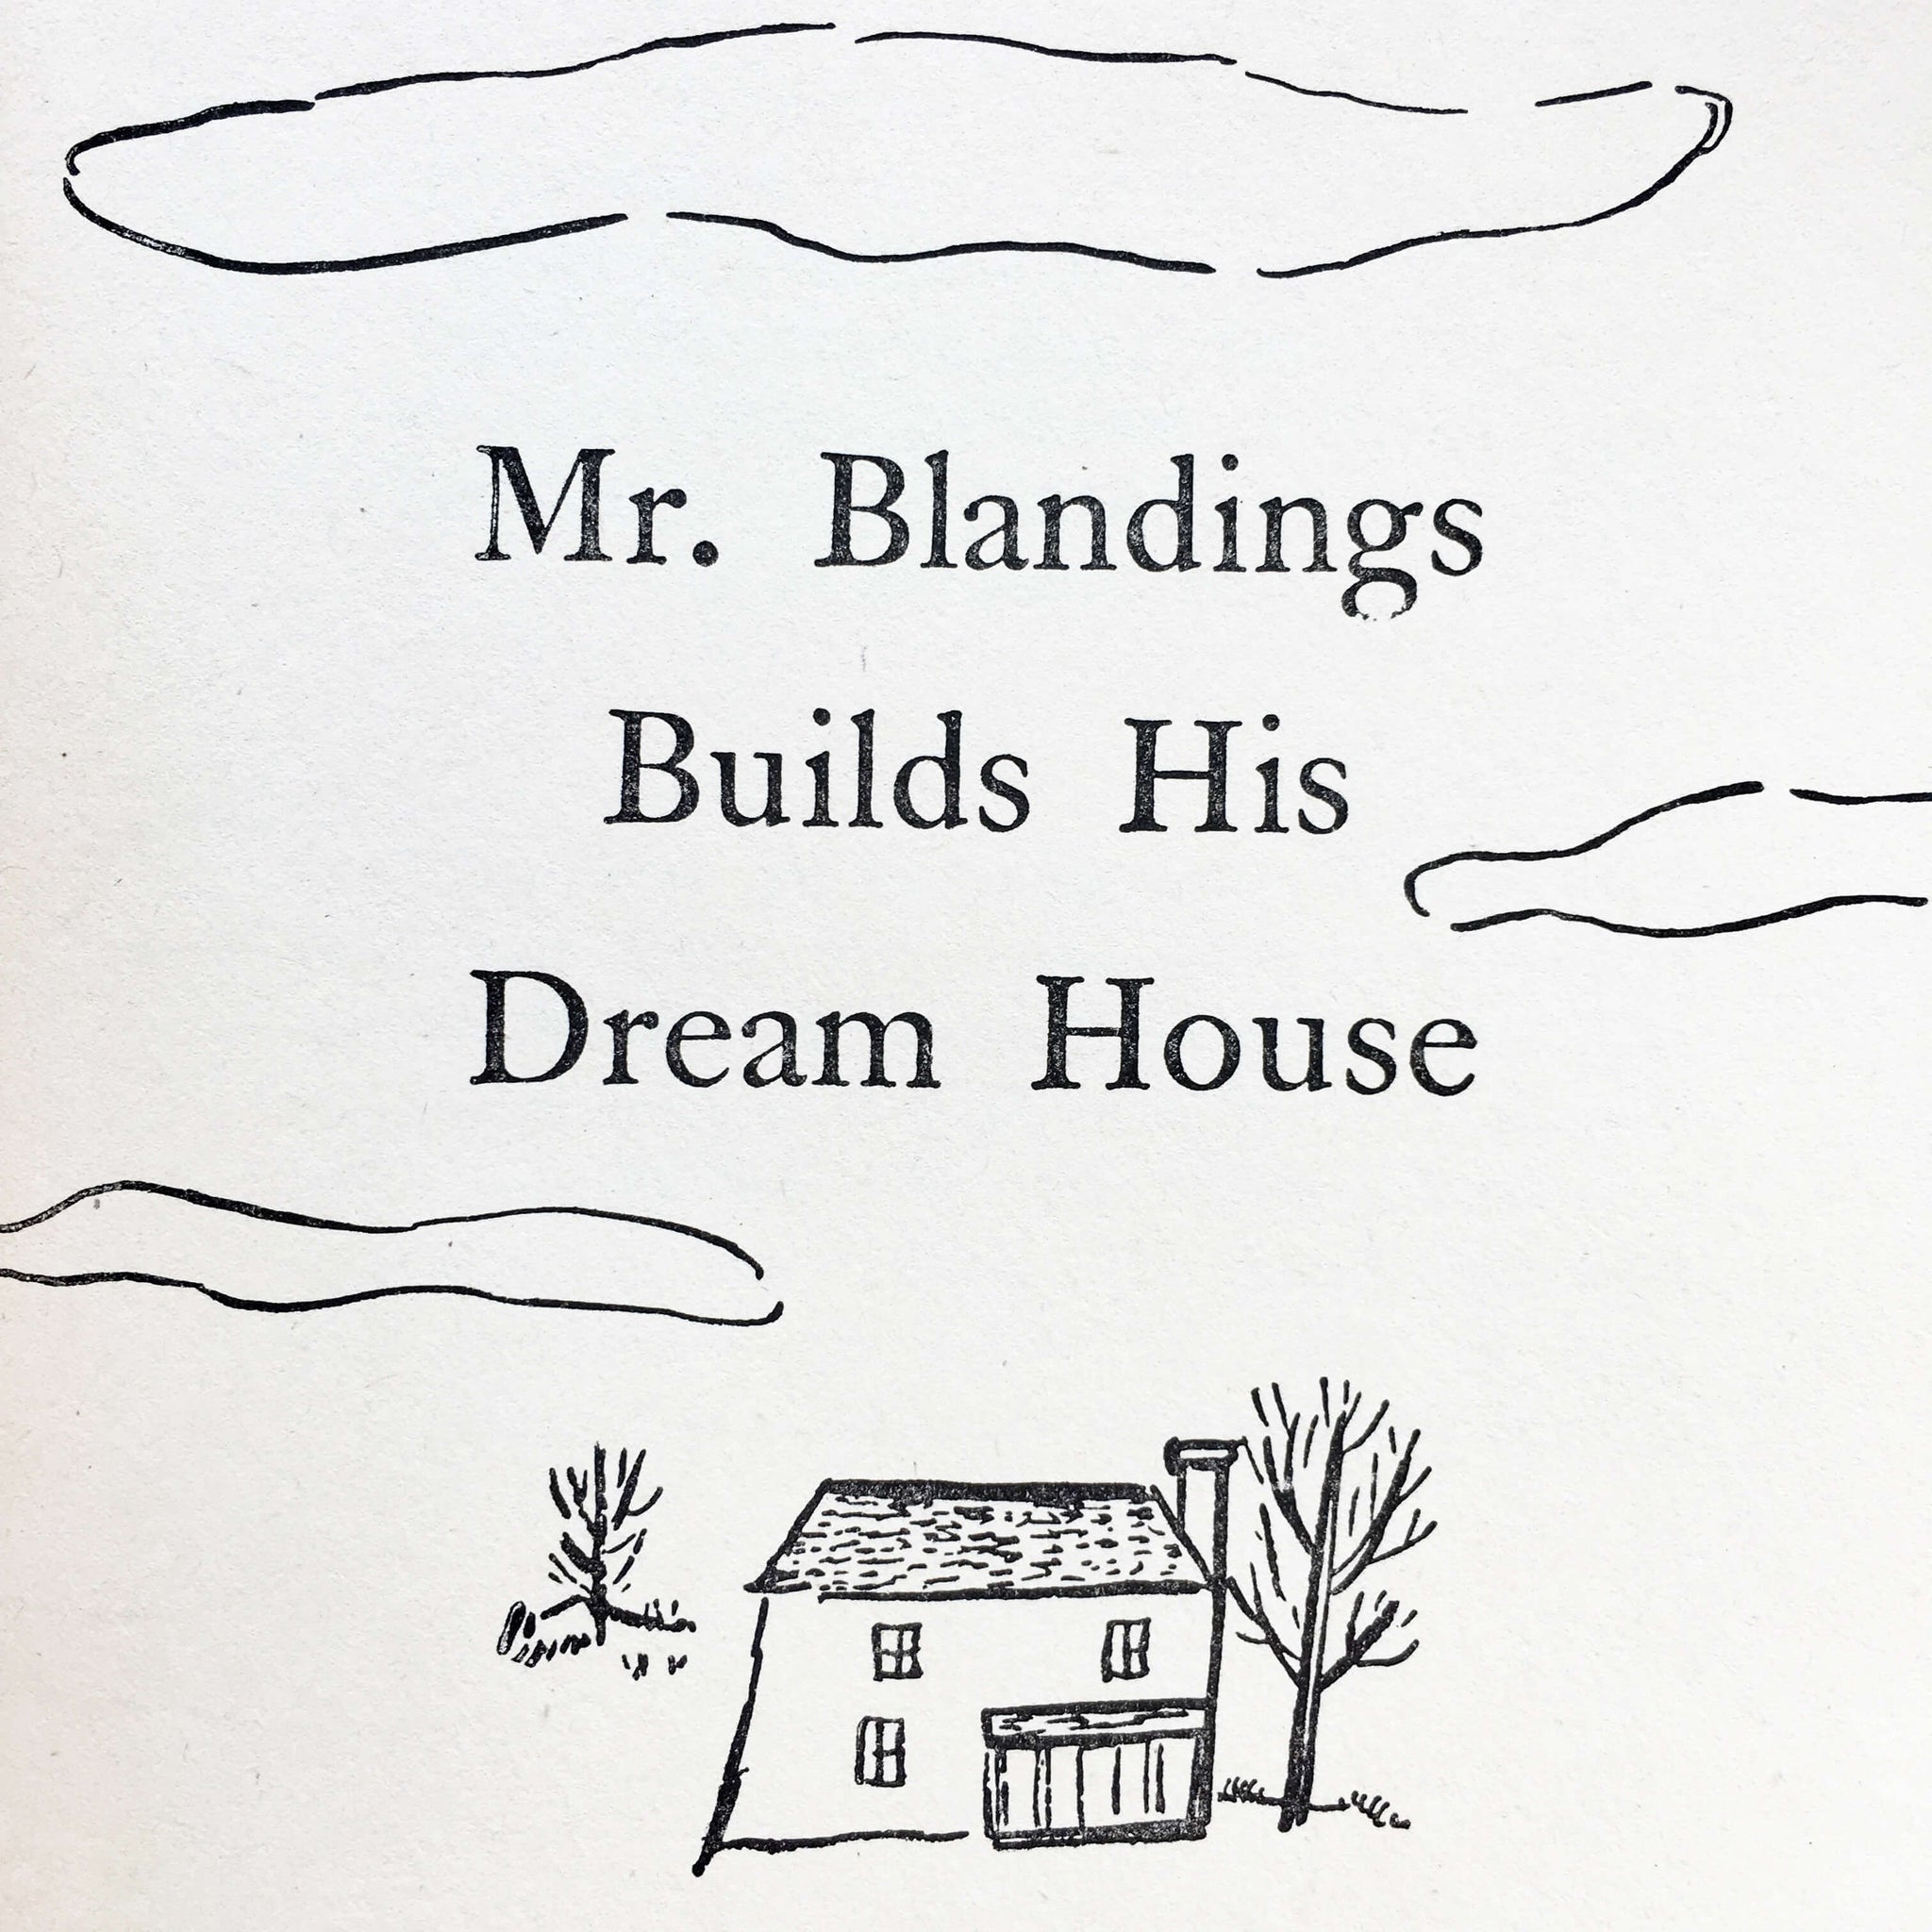 Mr. Blandings Builds His Dream House By Eric Hodgins - Illustrated by William Steig circa 1946 edition